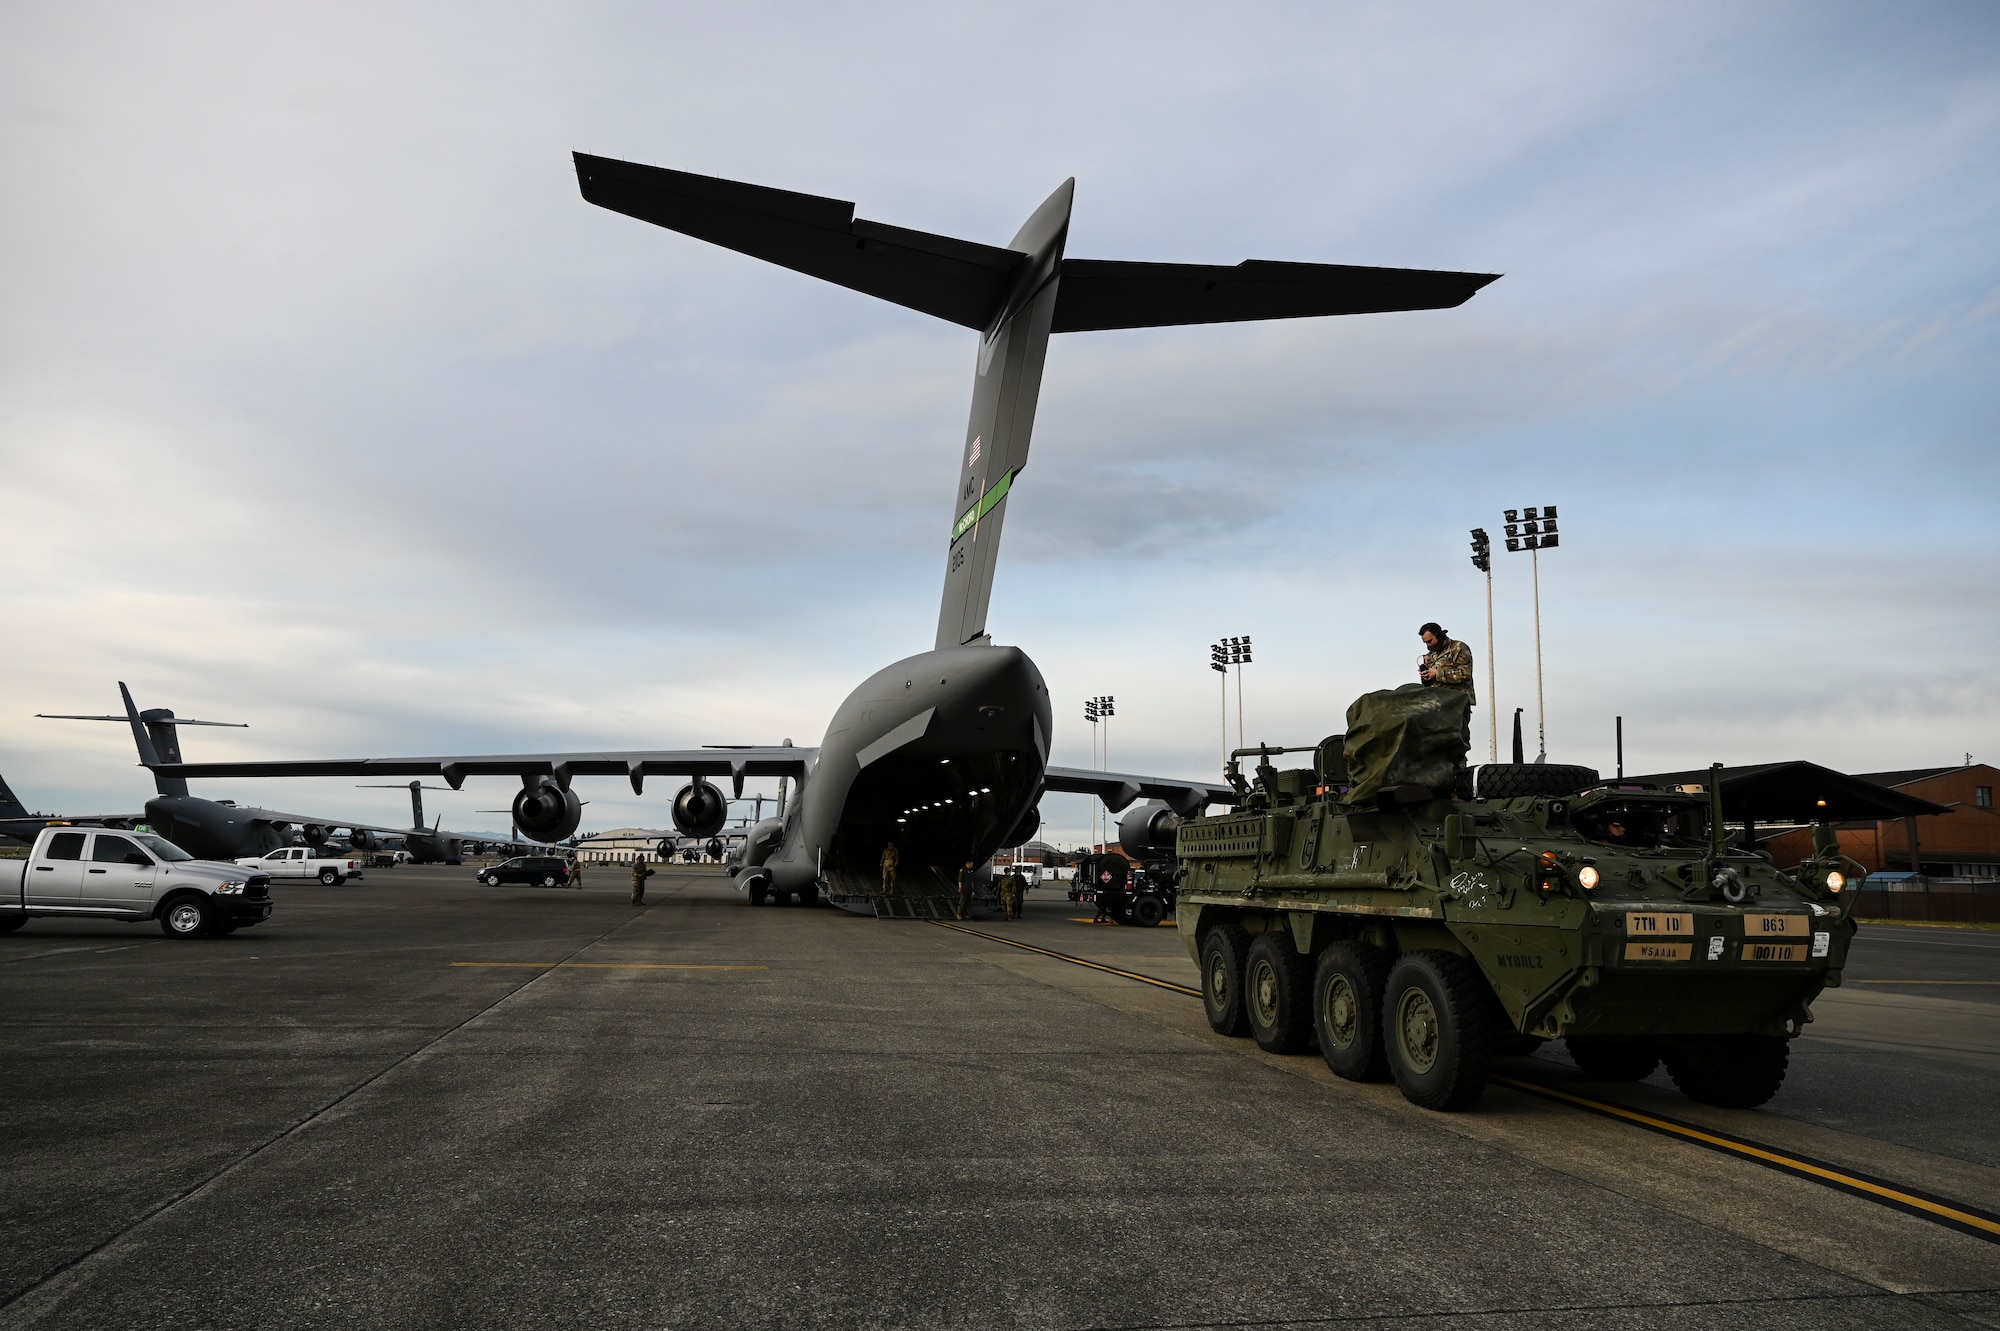 U.S. Air Force Airmen and U.S. Army Soldiers prepare to load a U.S. Army Stryker Infantry Carrier Vehicle into a C-17 Globemaster III as part of Exercise Rainier War at Joint Base Lewis-McChord, Washington, April 28, 2021. Rainier War tests the 62nd Airlift Wing's capability to plan, generate and execute a deployment tasking, sustain contingency operations, demonstrate full spectrum readiness while executing agile combat employment in a contested, degraded and operationally limited environment. (U.S. Air Force photo by Master Sgt. Julius Delos Reyes)